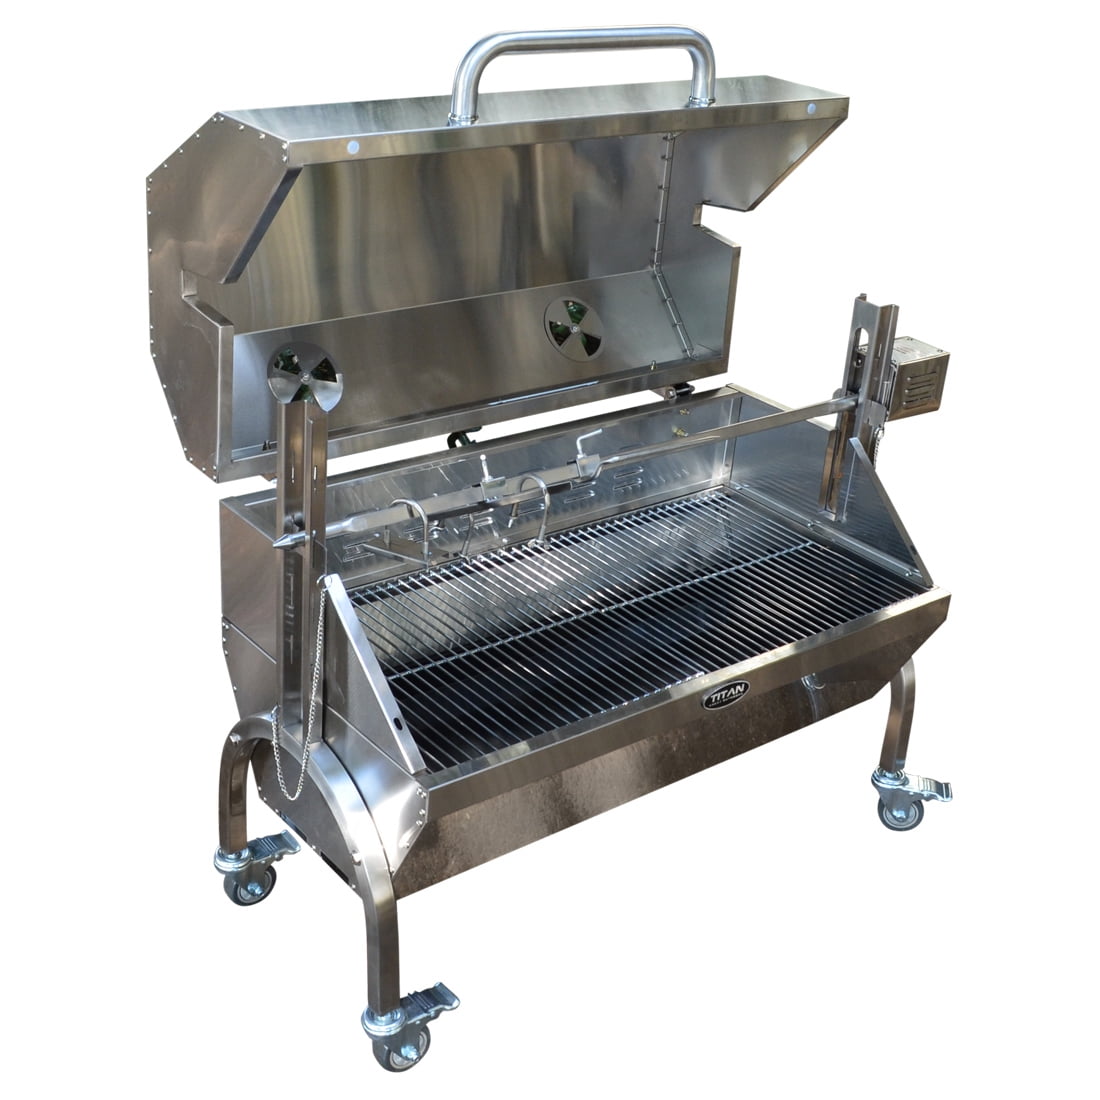 TITAN GREAT OUTDOORS Single Post Jumbo Park Style Charcoal Grill for The Backyard Patio